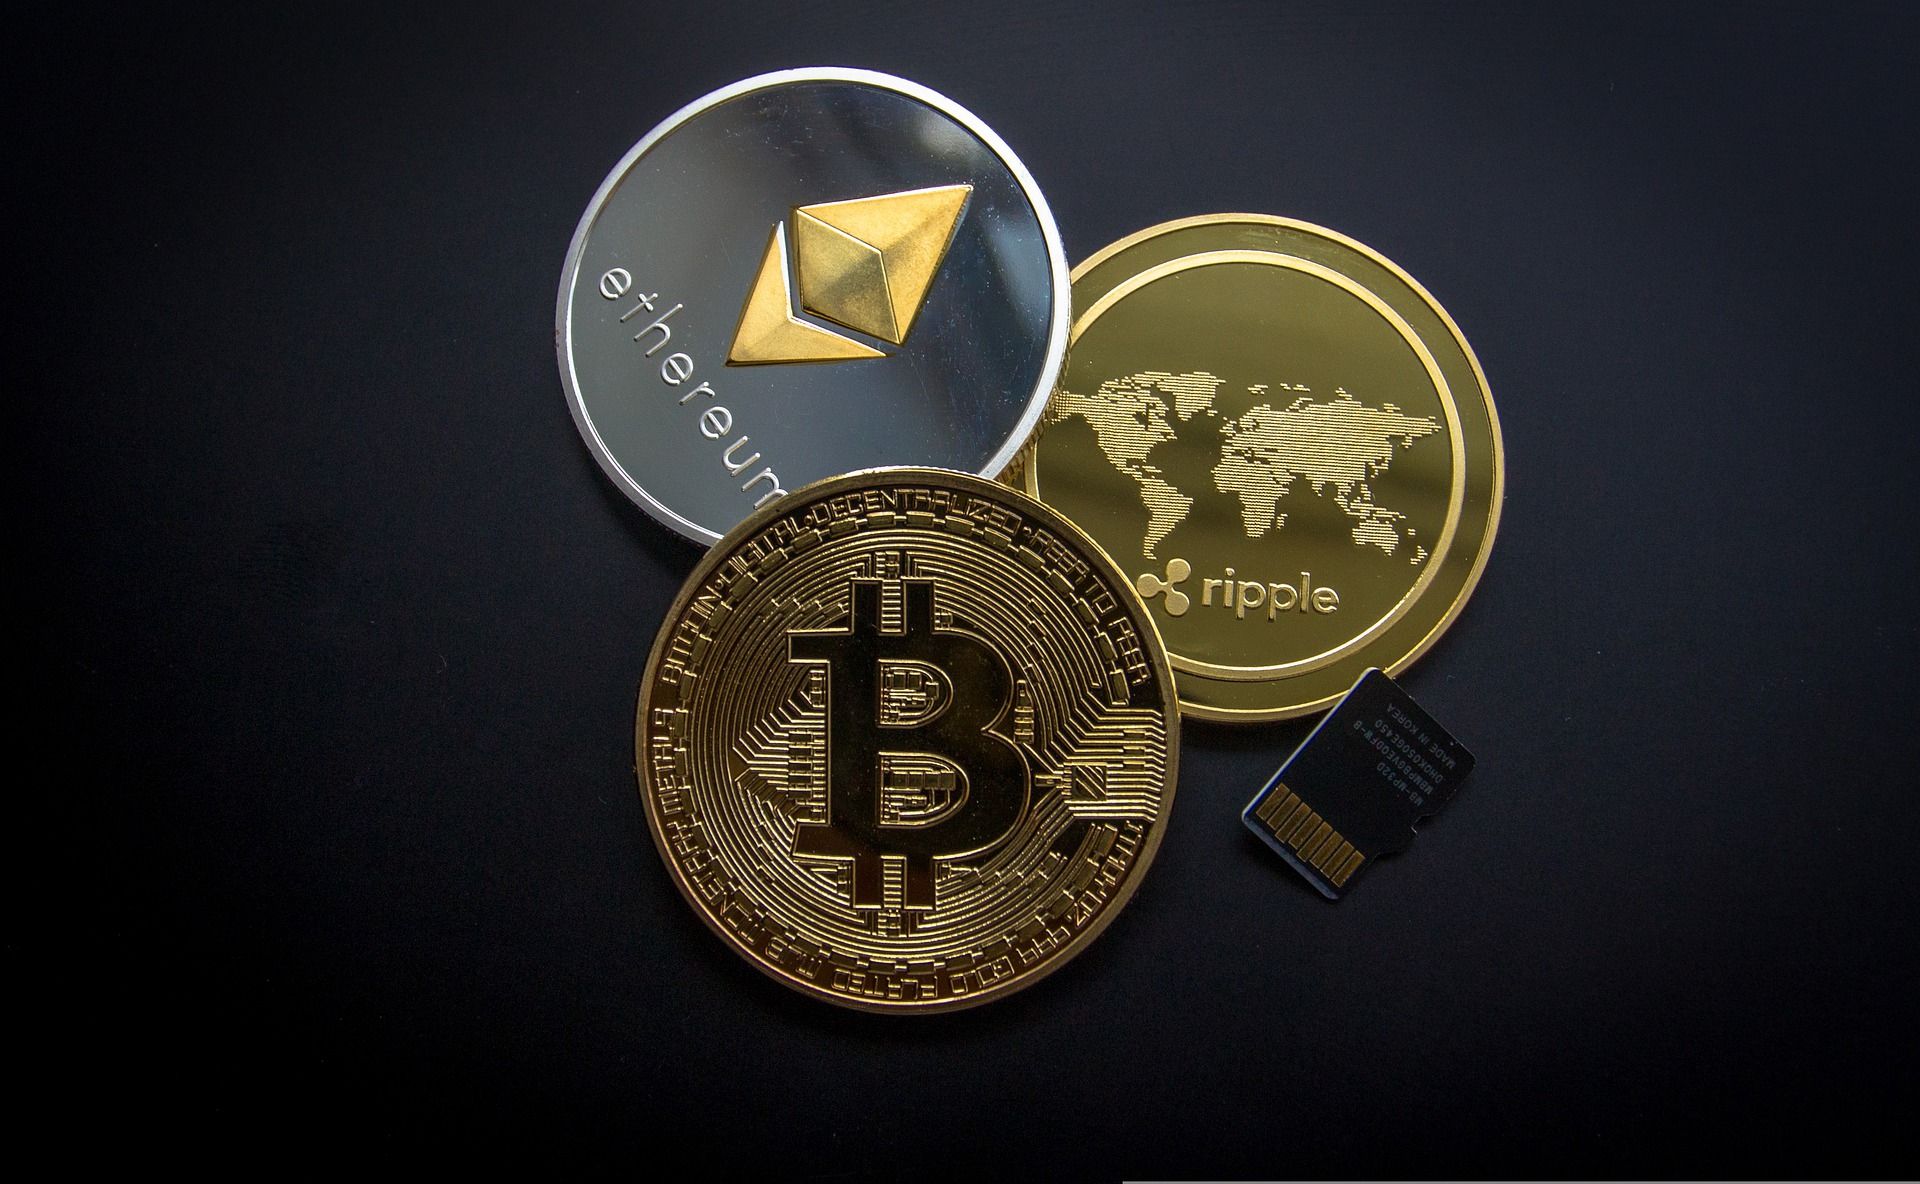 Top 5 cryptocurrencies of the day: Bitcoin up 1%, FTX Token trends at no. 1